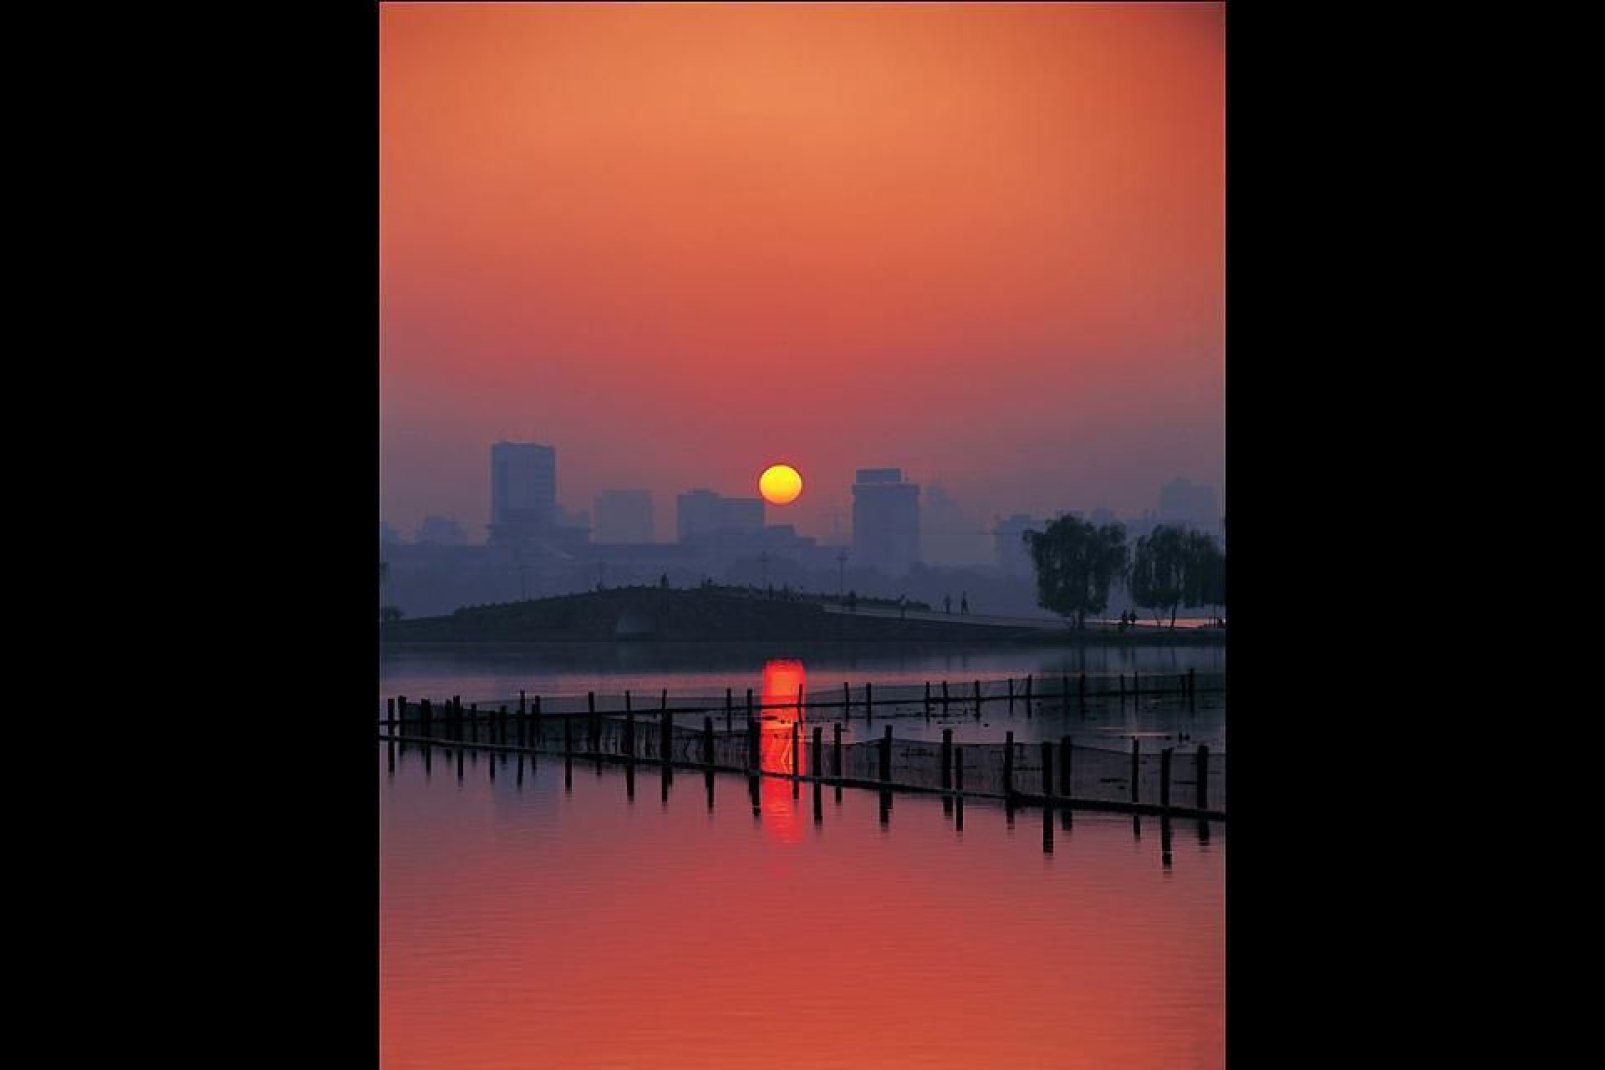 Sunset in Hangzhou, a city situated in the Yangtze River Delta 87 miles south-east of Shanghai.